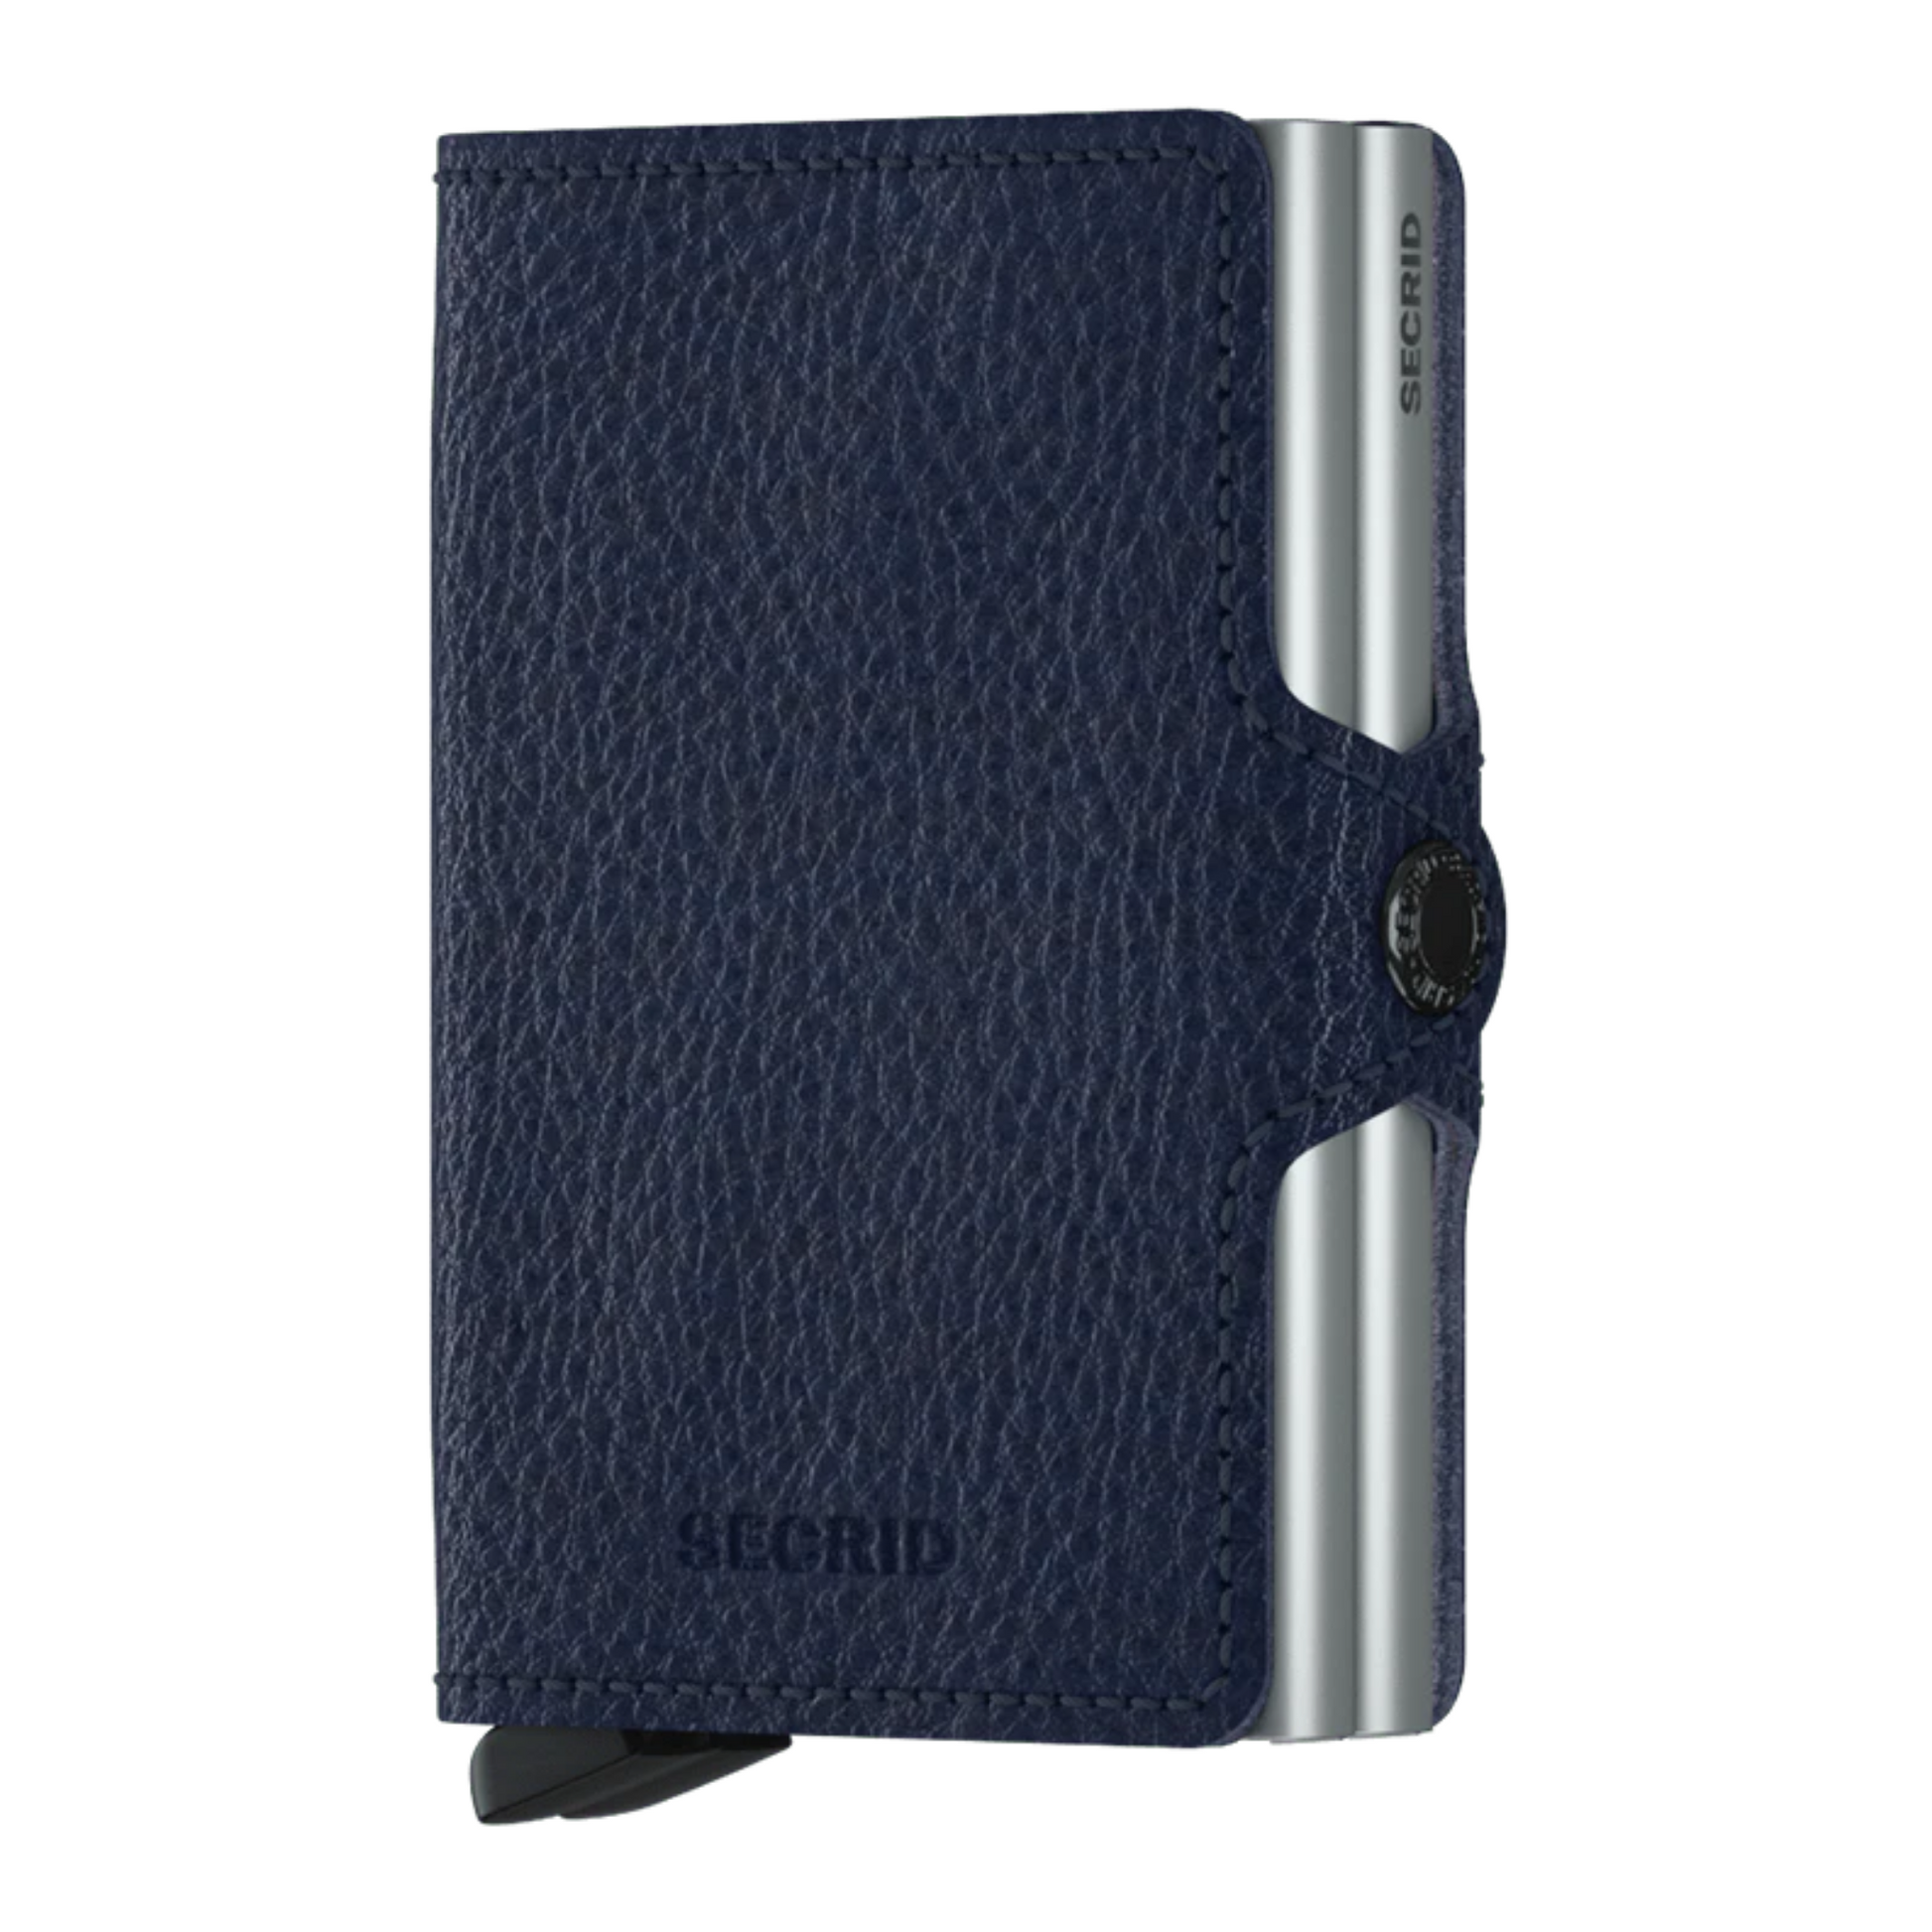 A textured blue wallet features a pair of metallic silver cardholders.